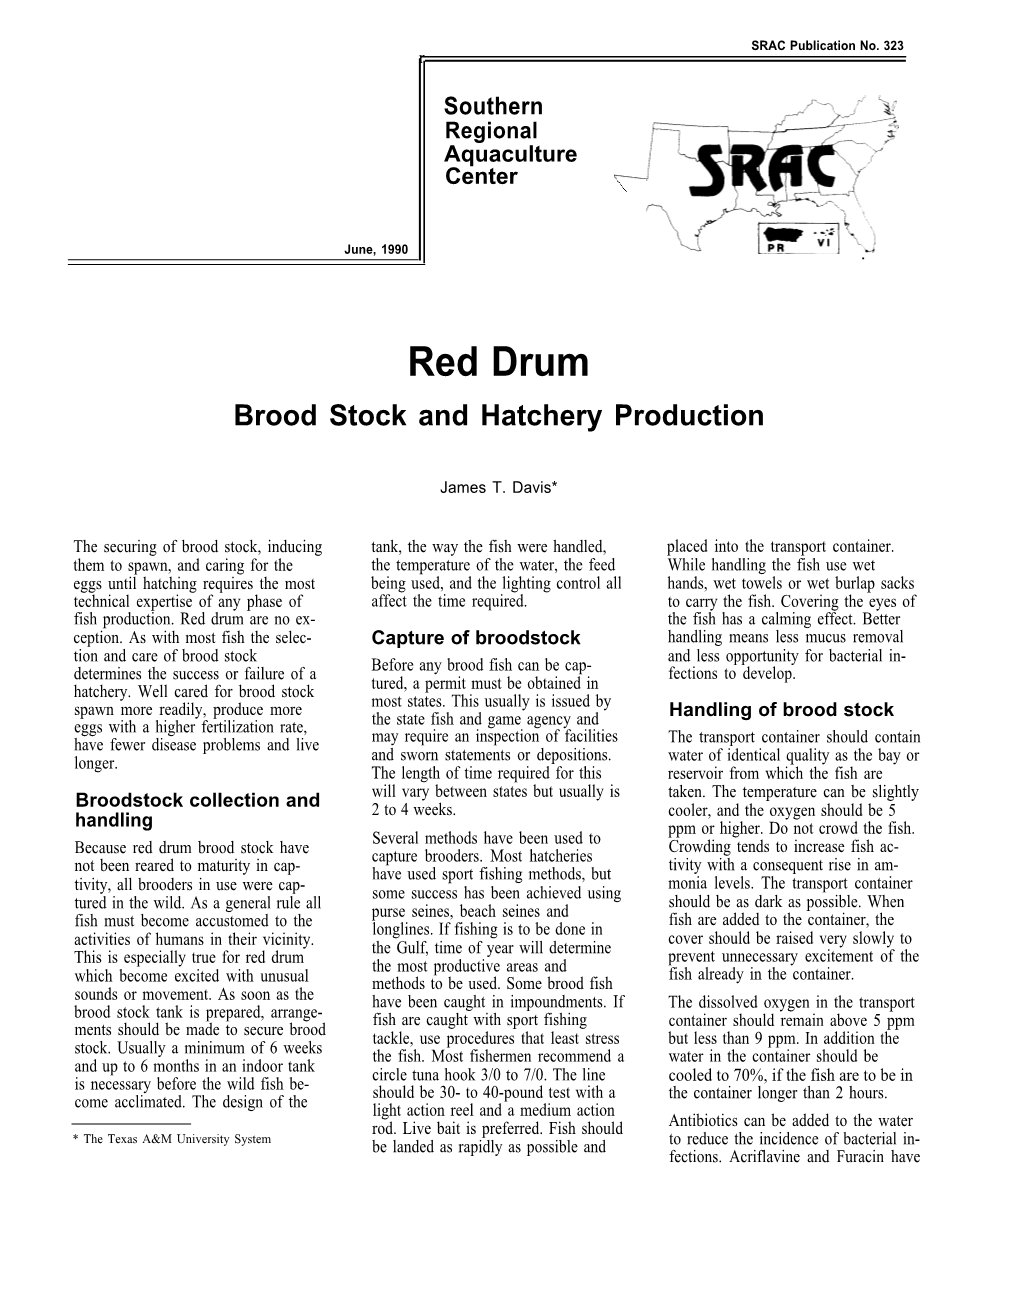 Red Drum: Brood Stock and Hatchery Production